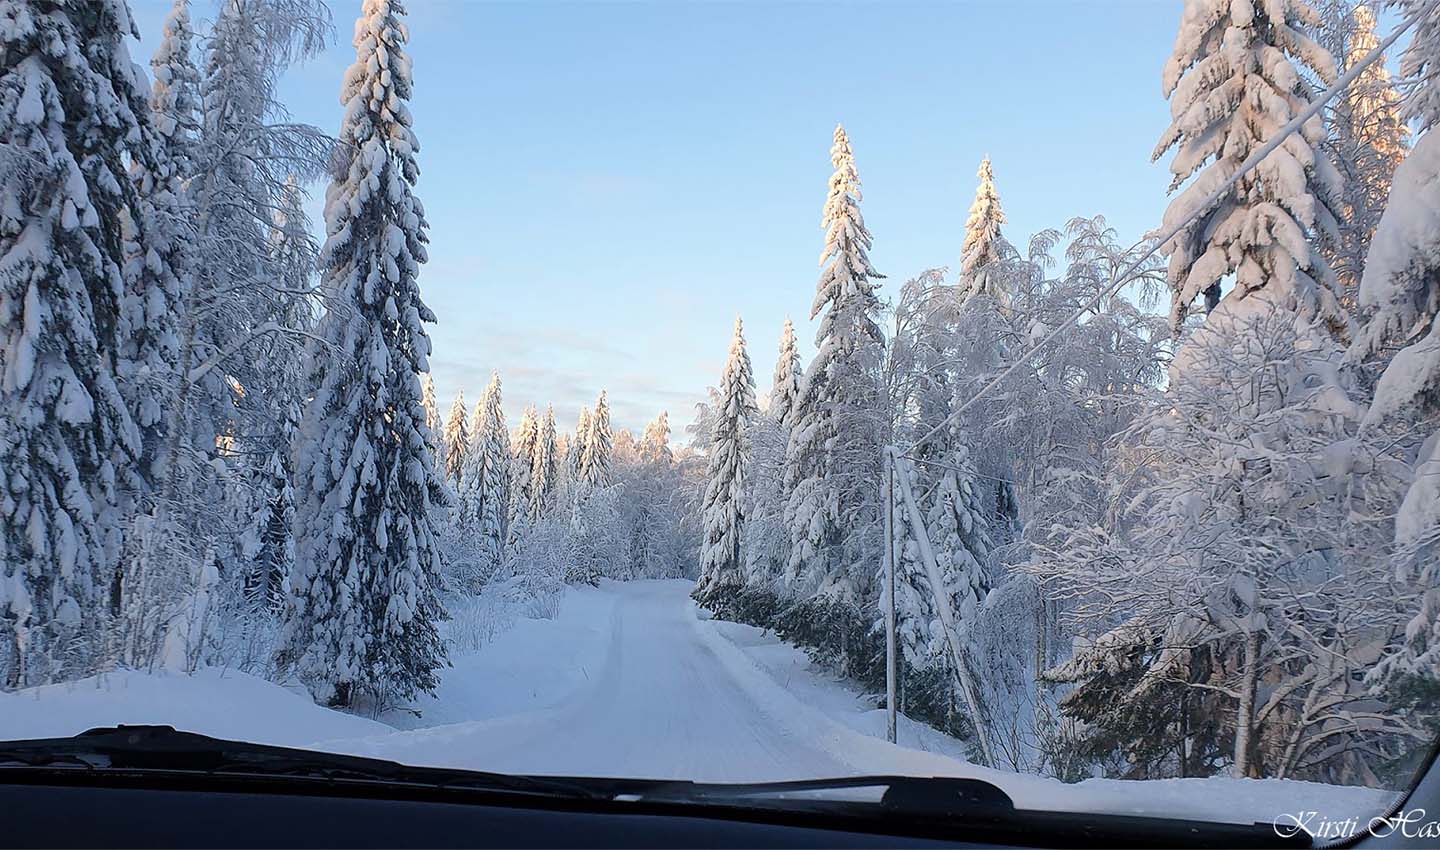 After snowfall the road is a winter wonderland, but significantly more dangerous than in summer. Credit: Suakkuna Blogspot, Kirsti Hassinen, 2019